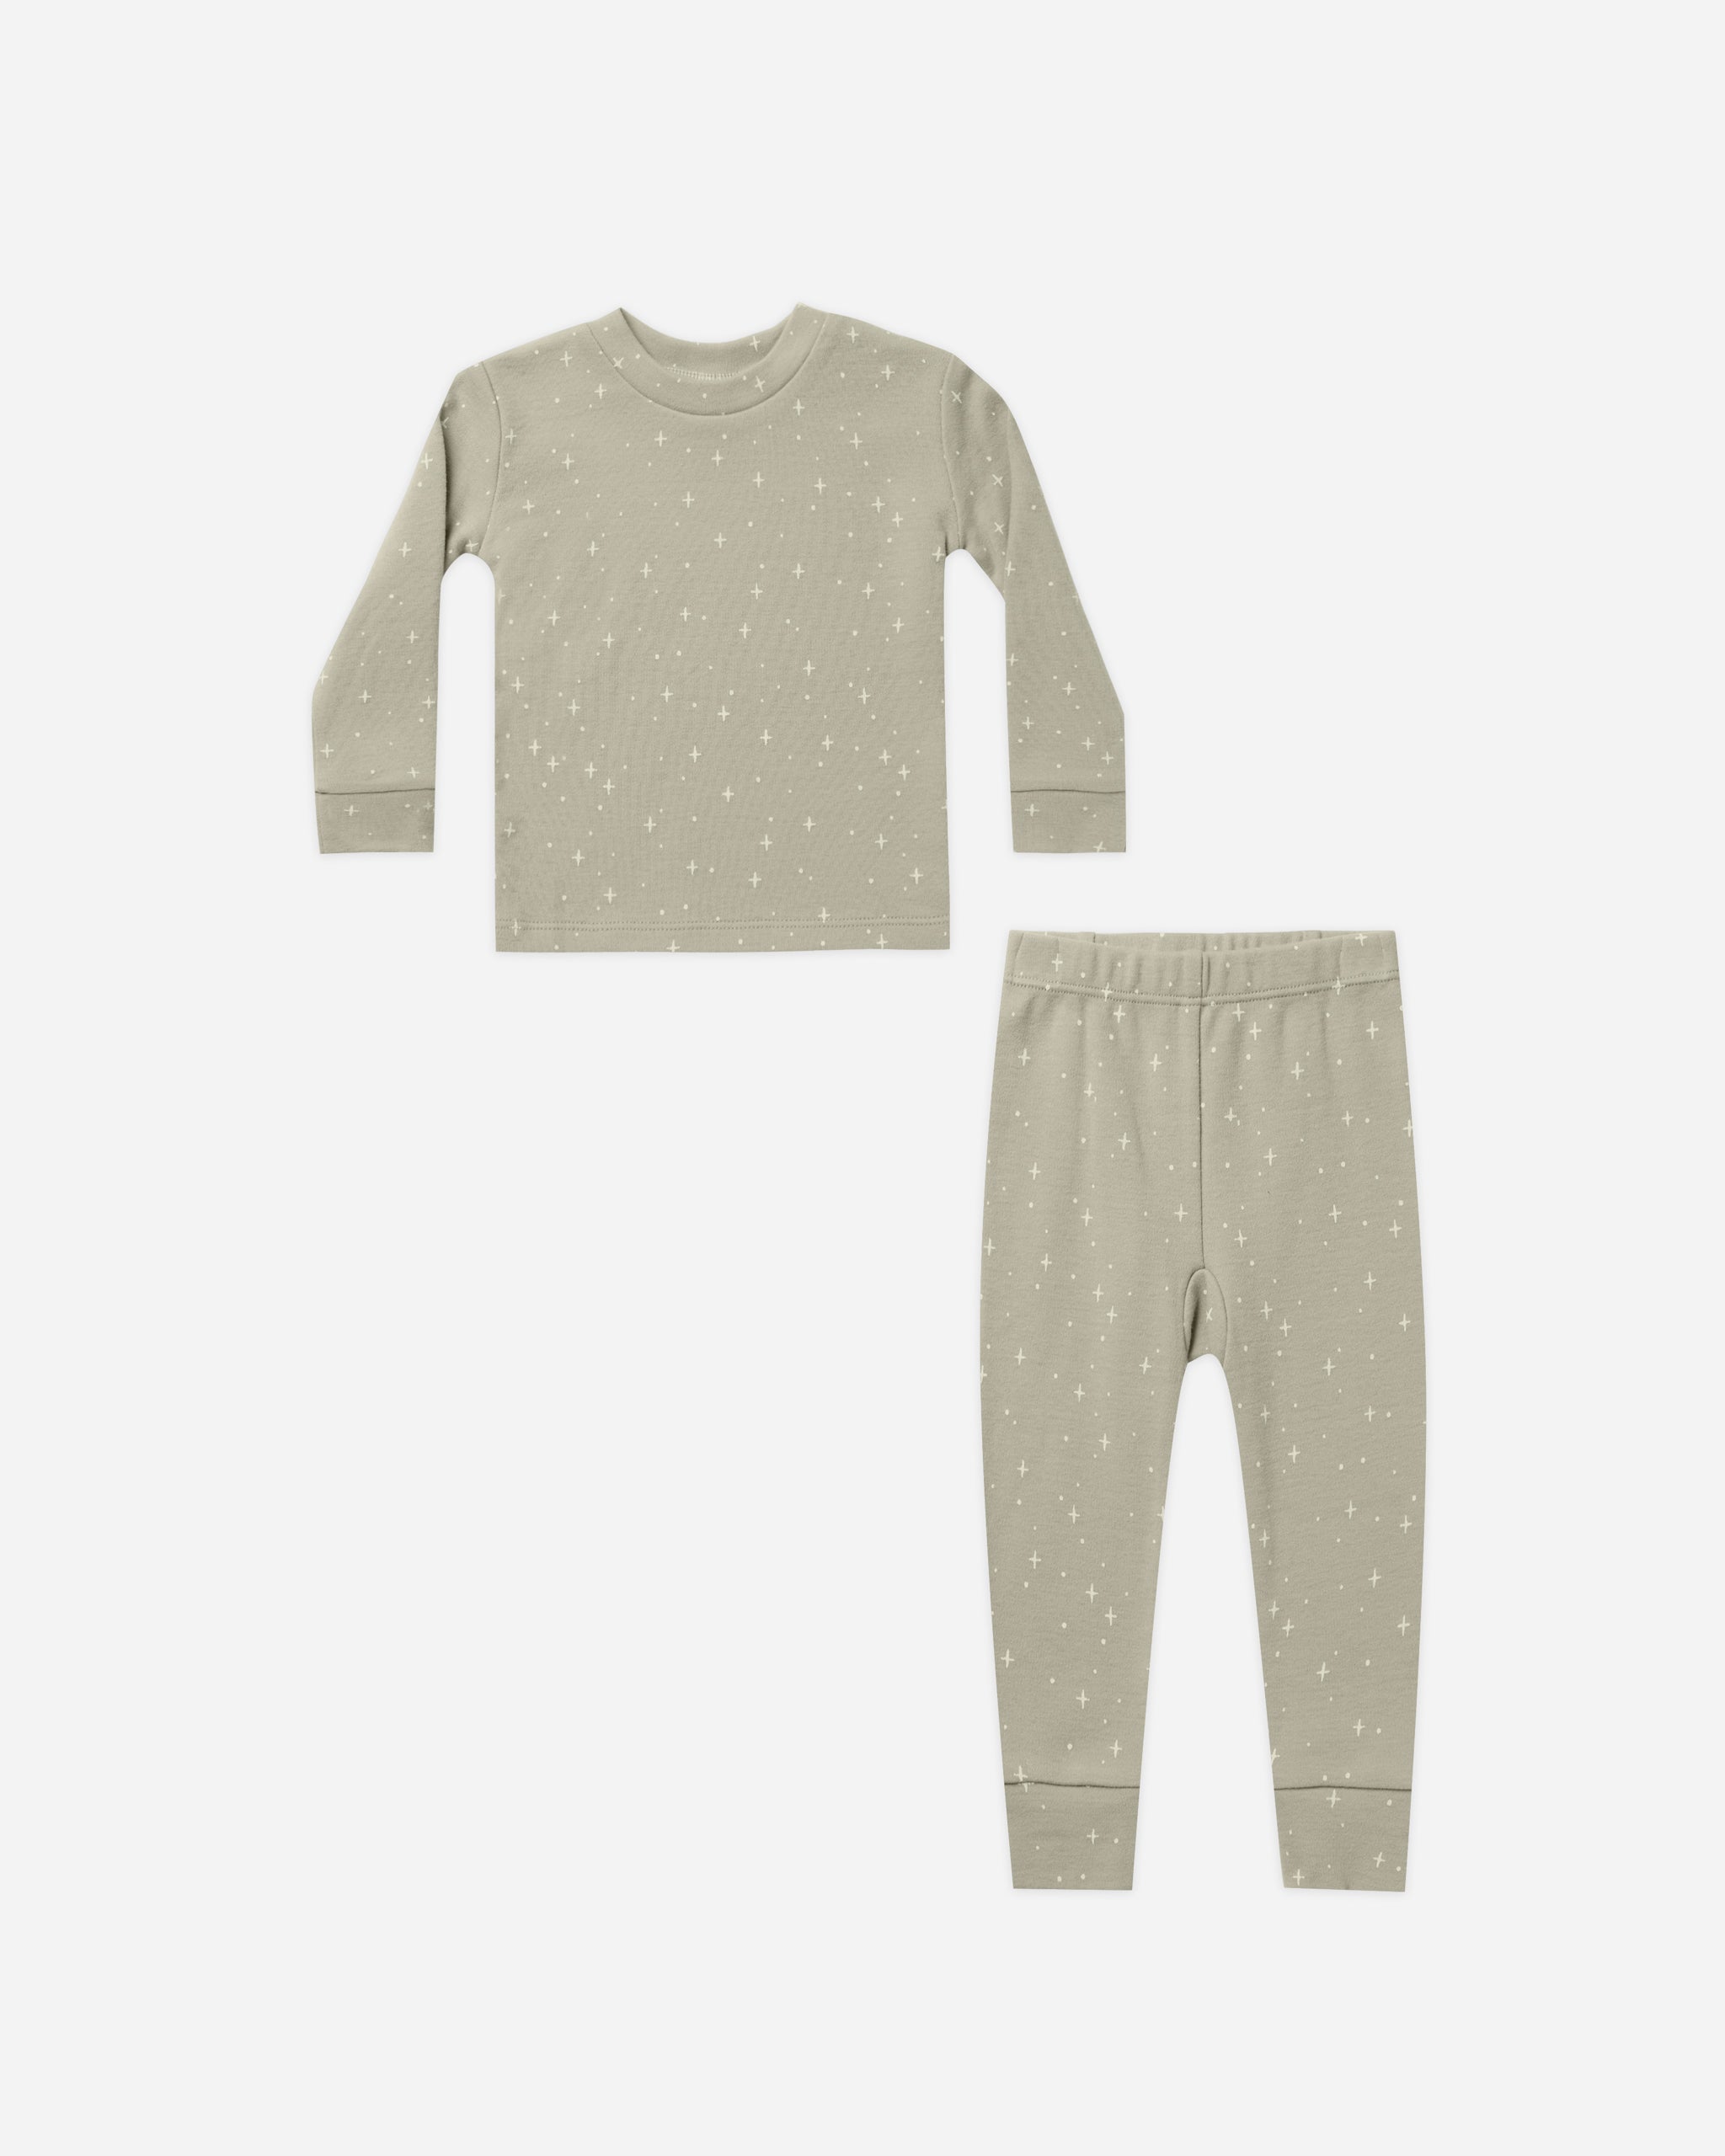 Organic Pajama Set || Twinkle - Rylee + Cru | Kids Clothes | Trendy Baby Clothes | Modern Infant Outfits |